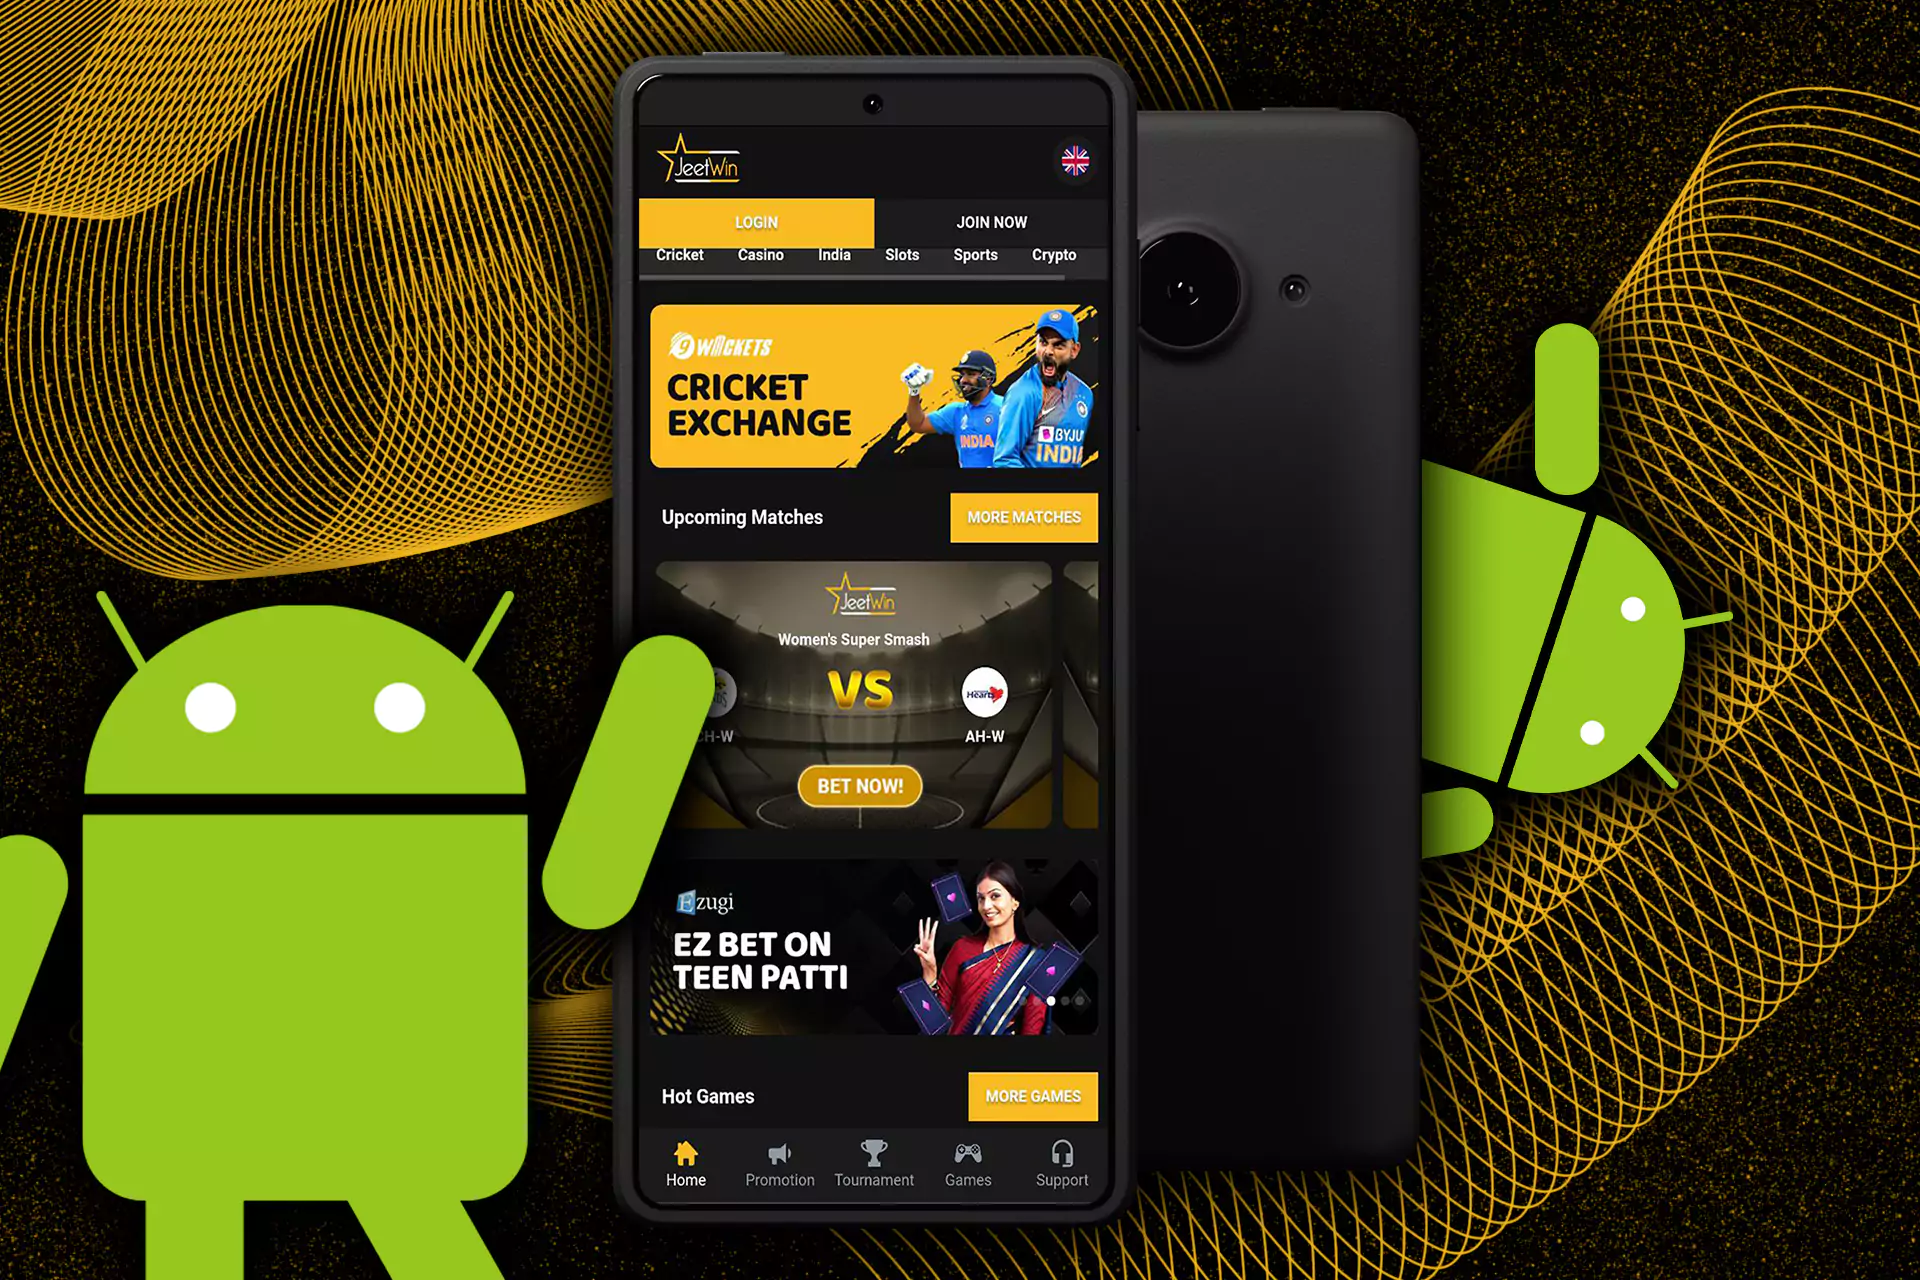 If you regularly use Android devices, install the Jeetwin app and play from anywhere.